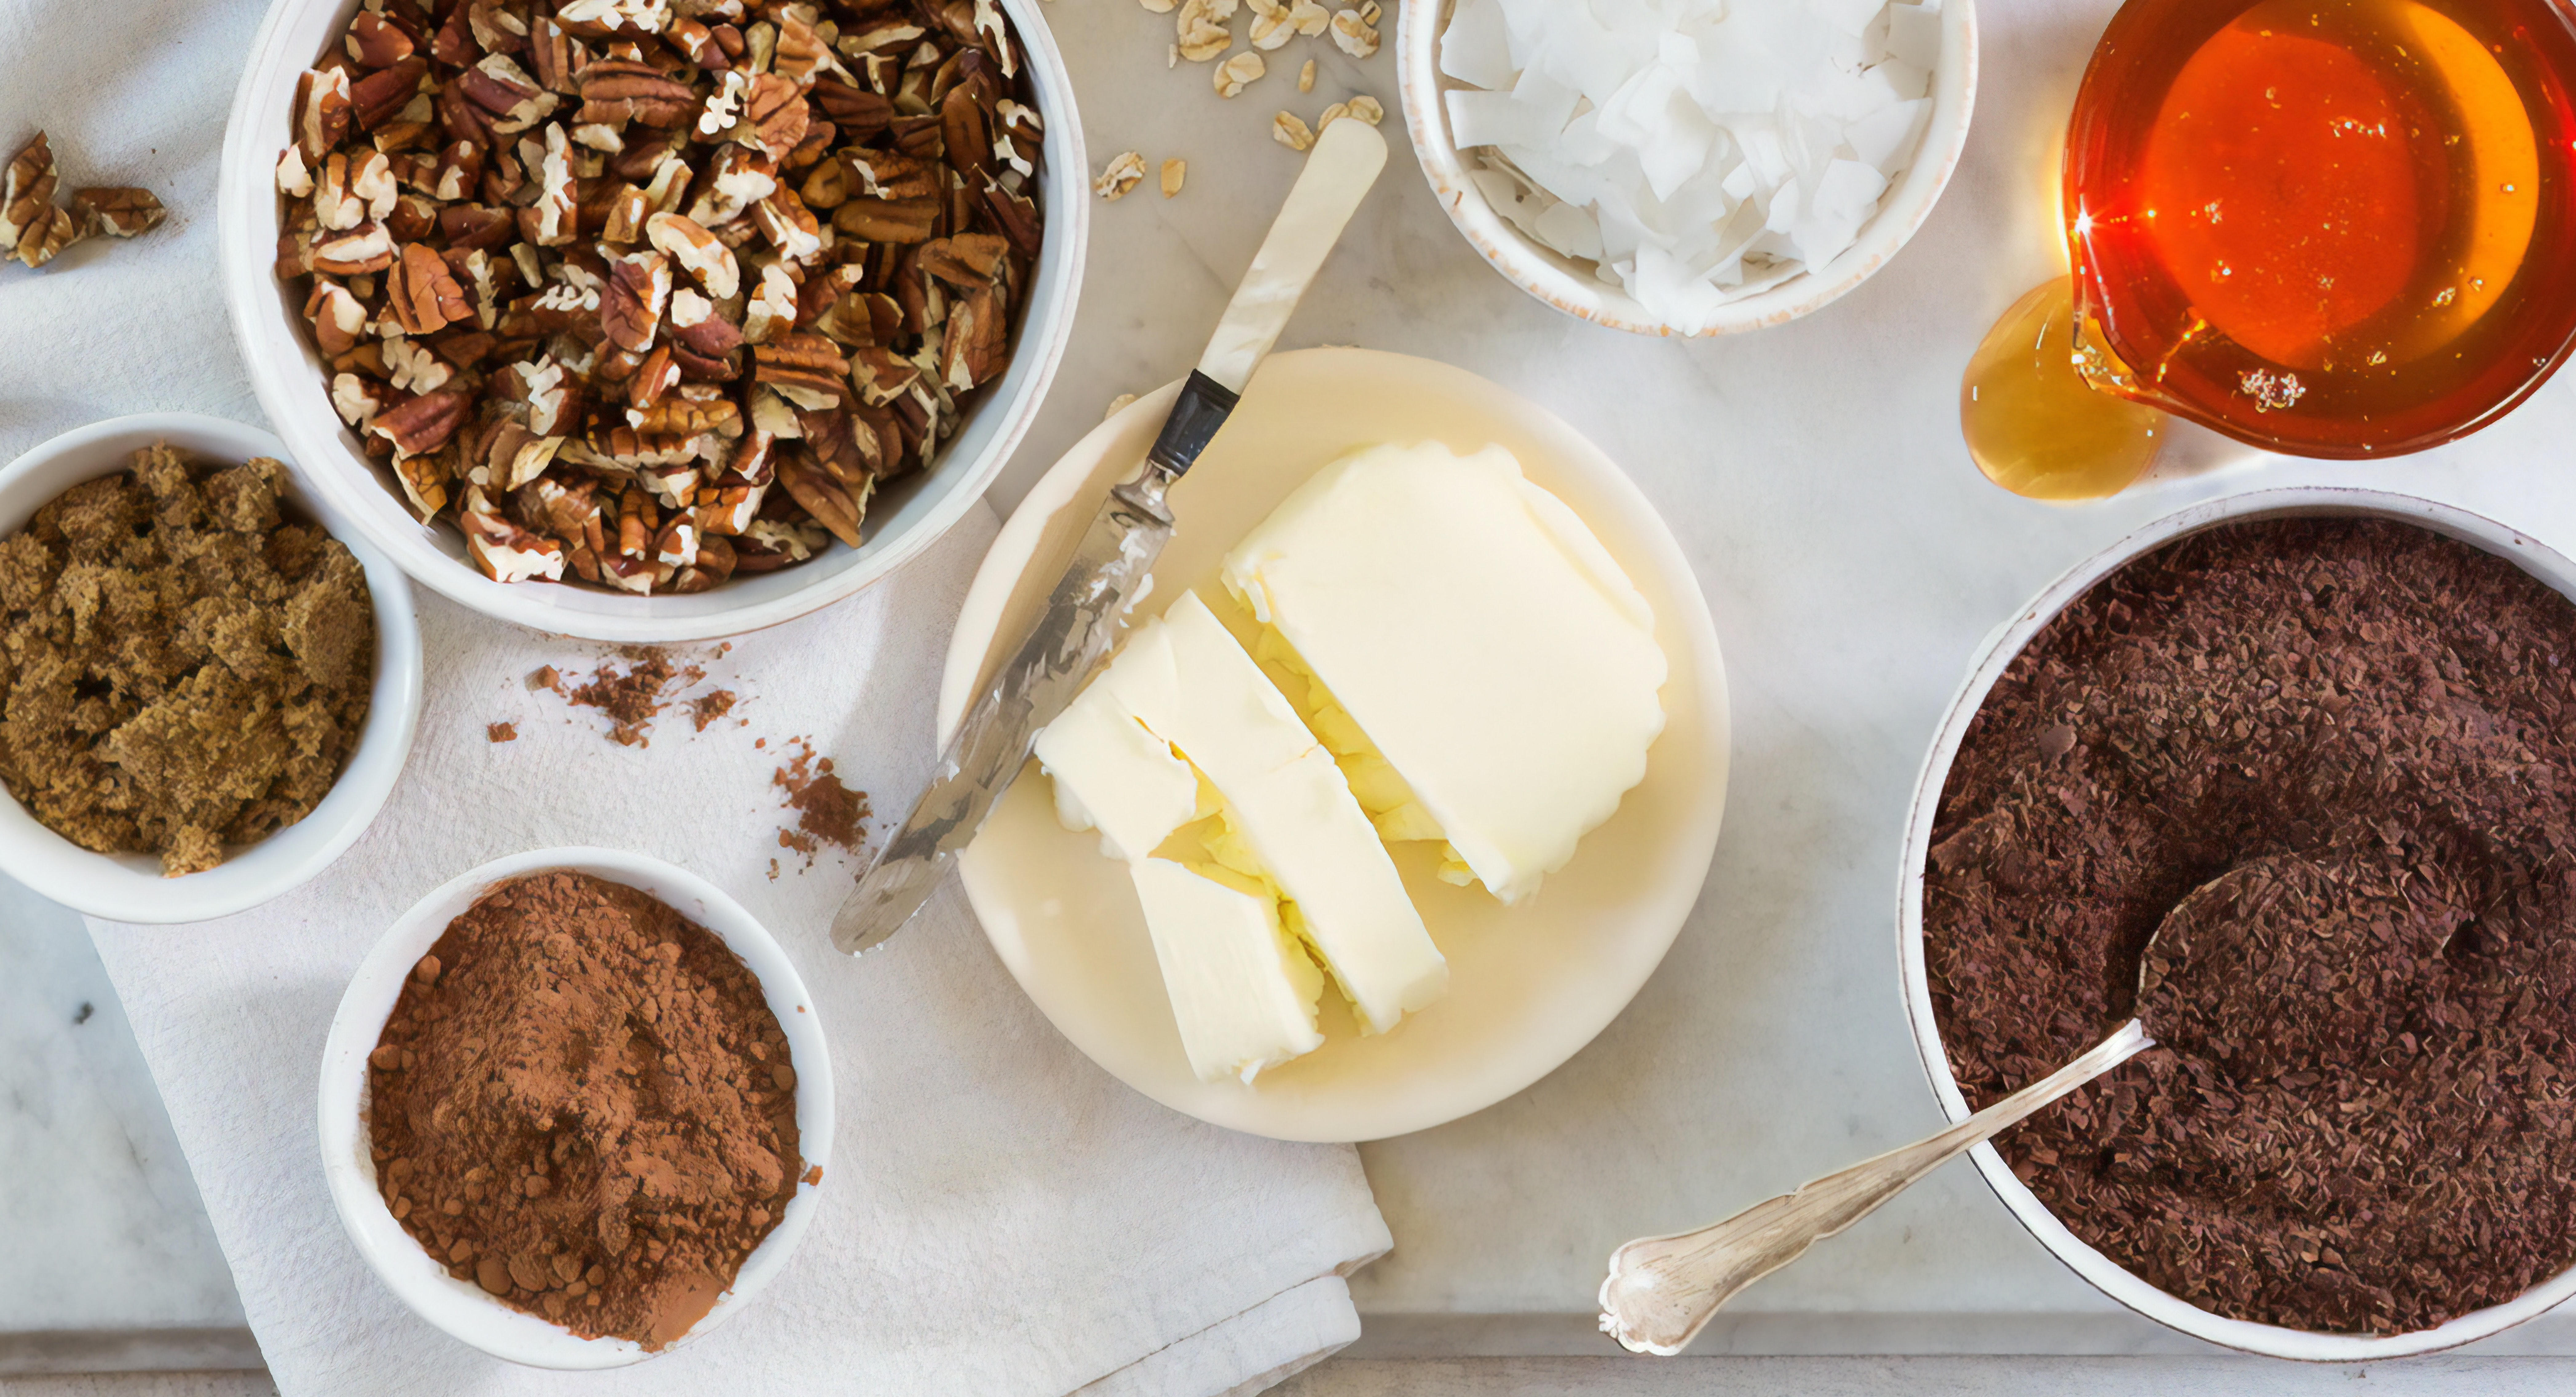 Ingredient bowls with butter, coconut, honey, chocolate flakes, walnuts, cocoa powder, and brown sugar